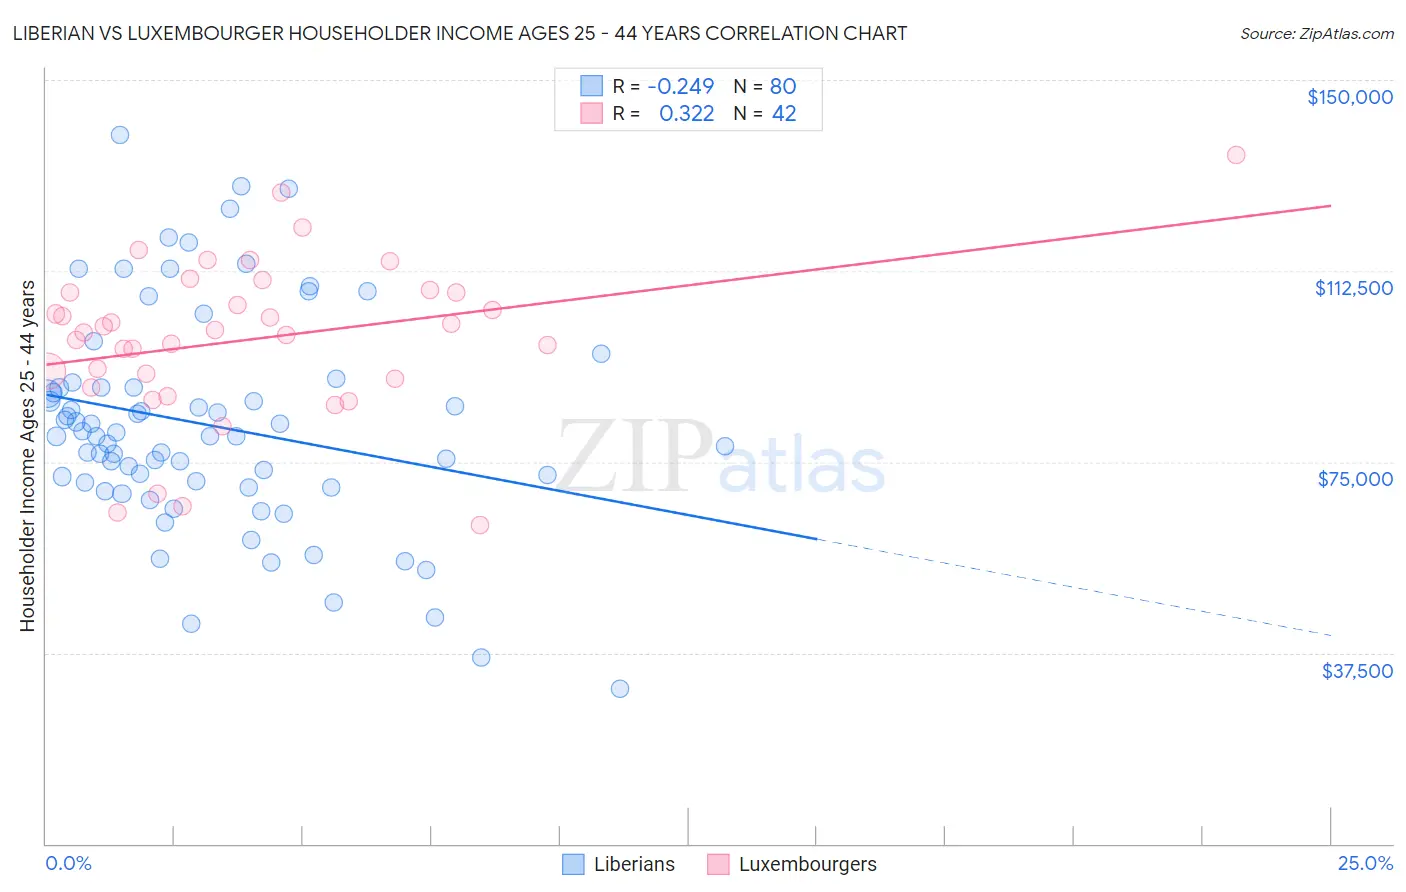 Liberian vs Luxembourger Householder Income Ages 25 - 44 years